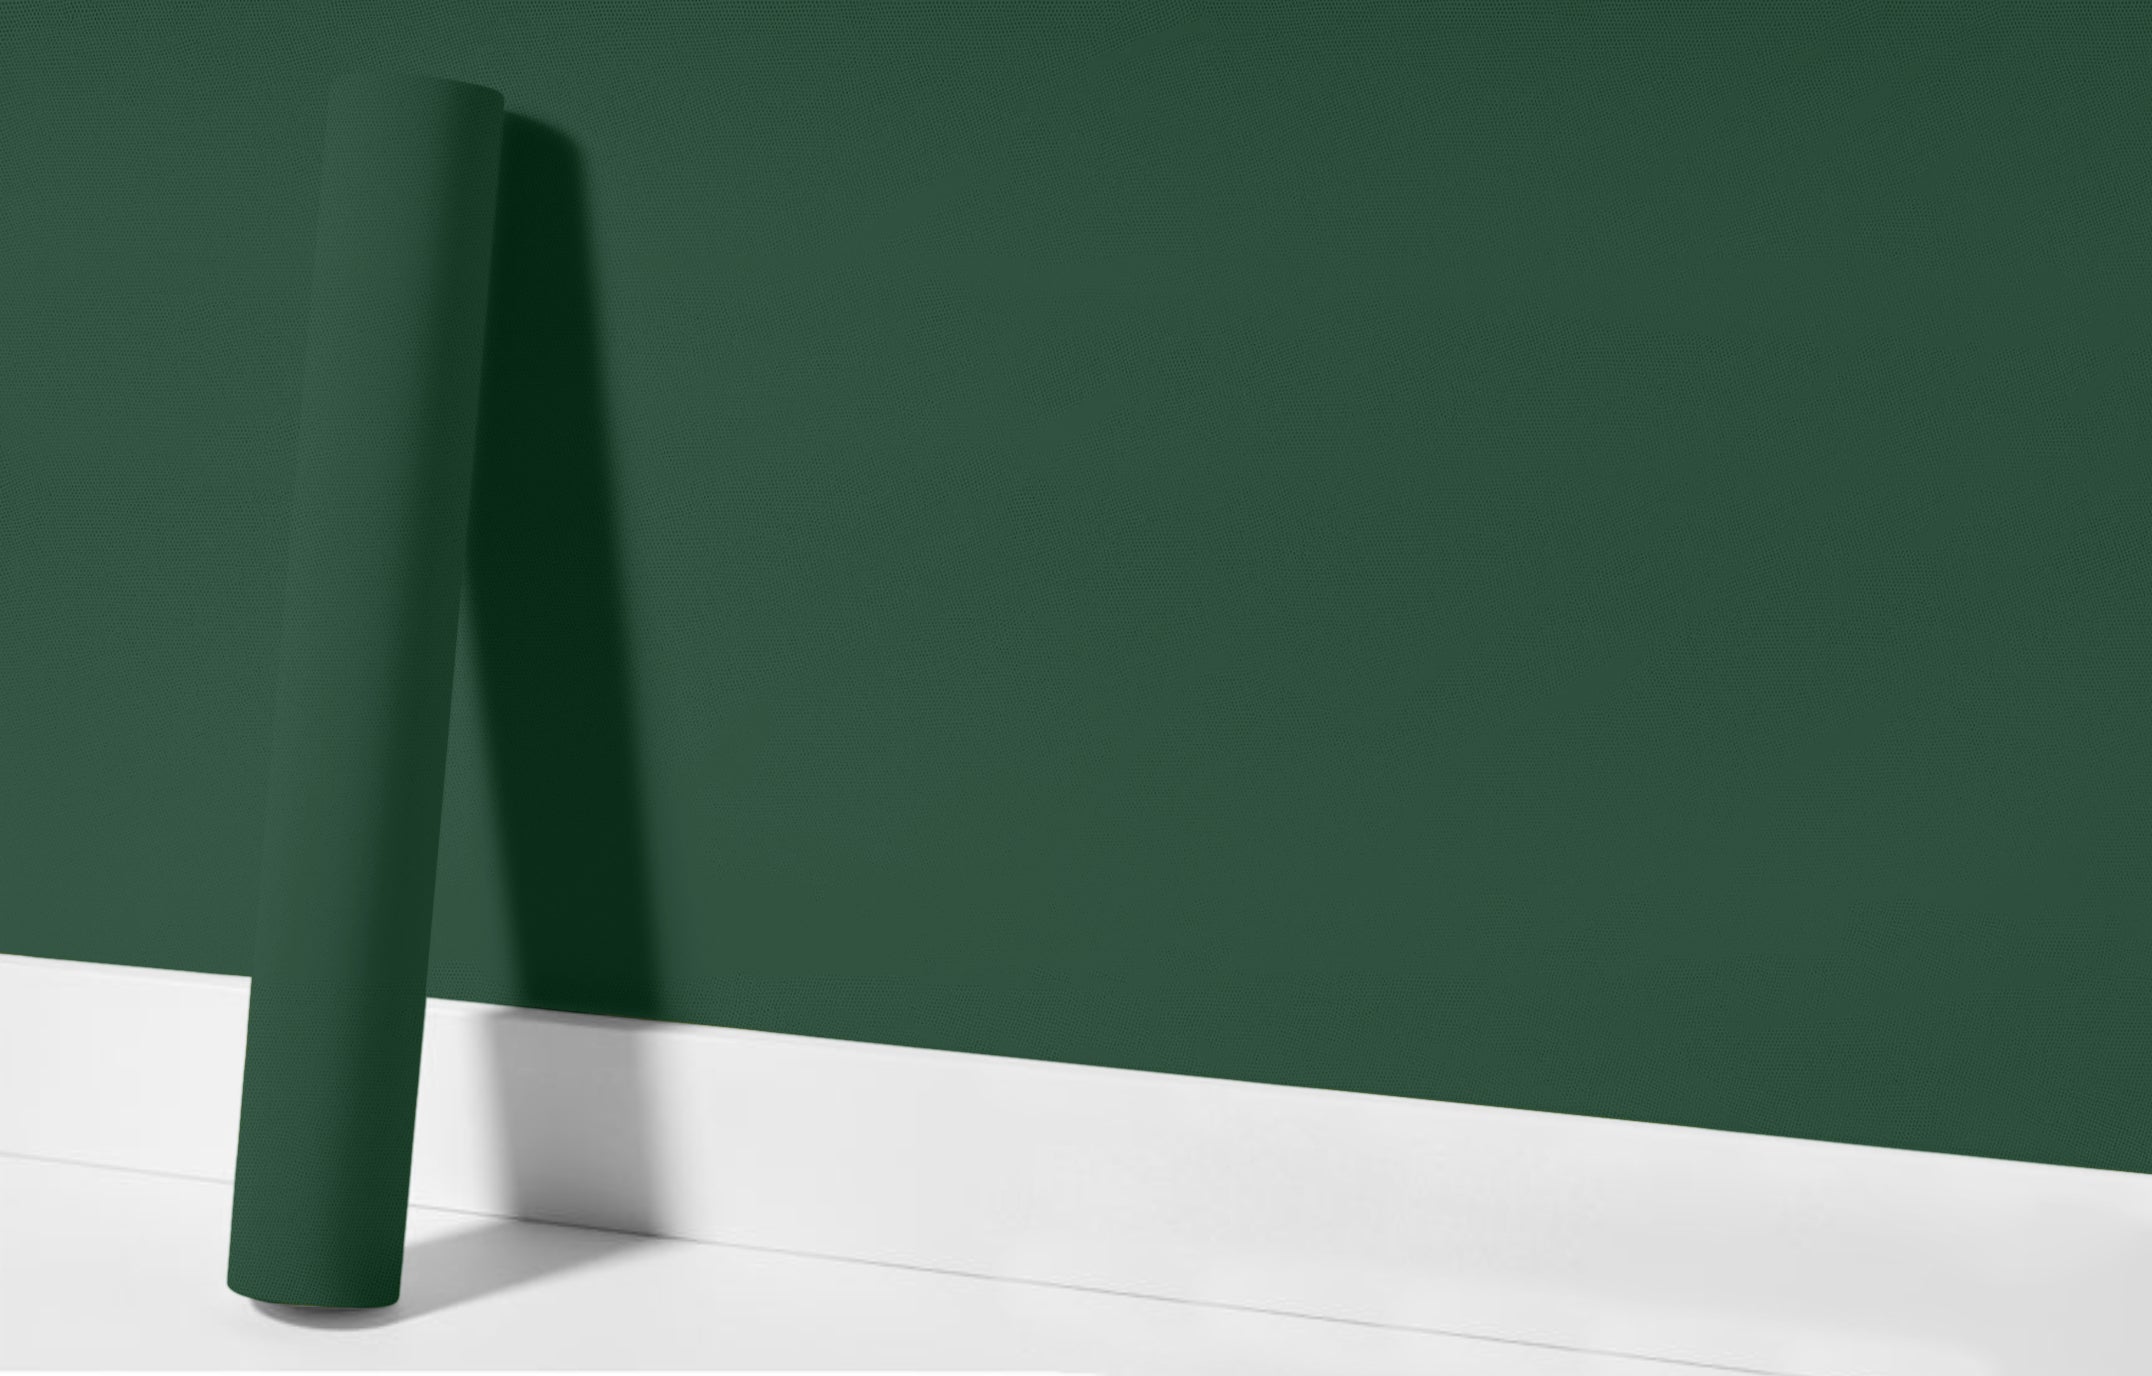 Peel & Stick Removable Re-usable Paint - Color RAL 6028 Pine Green - offRAL™ - RALRAW LLC, USA